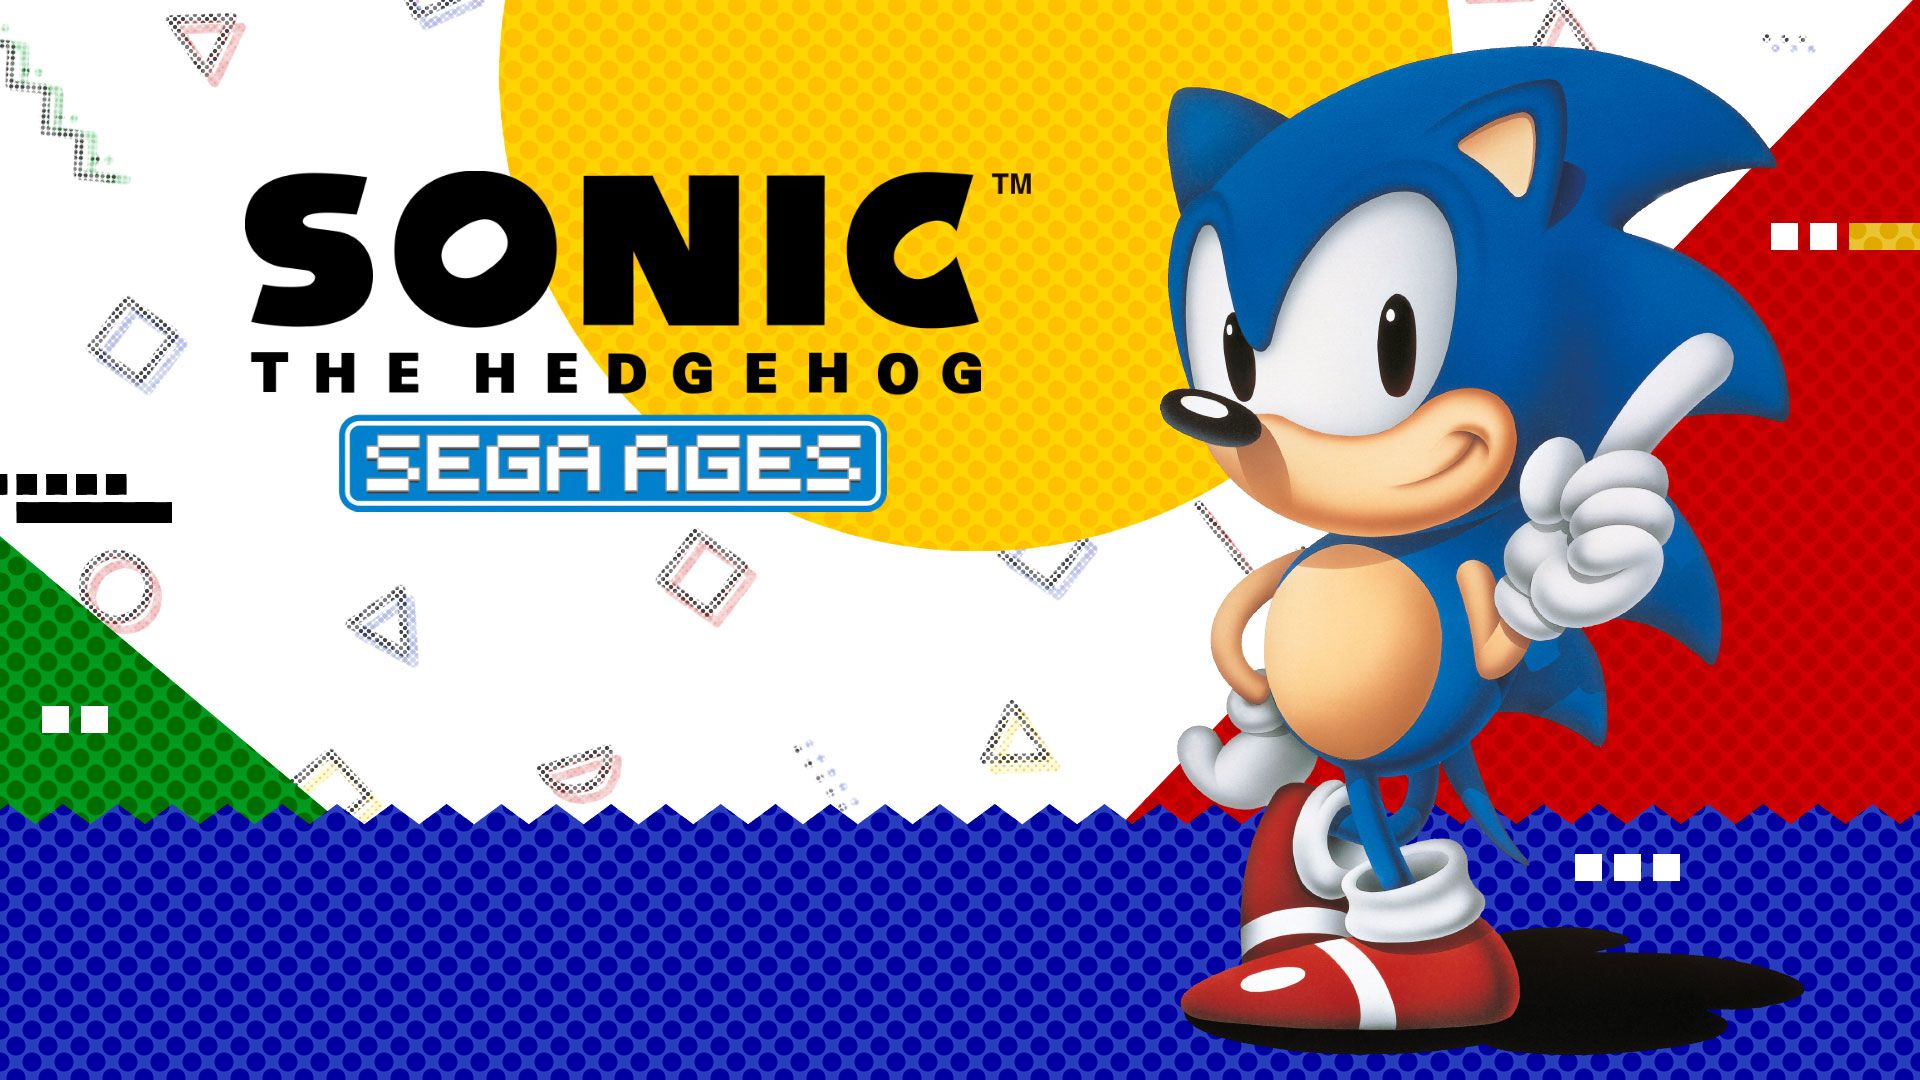 SEGA AGES Sonic The Hedgehog for Nintendo Switch Game Details